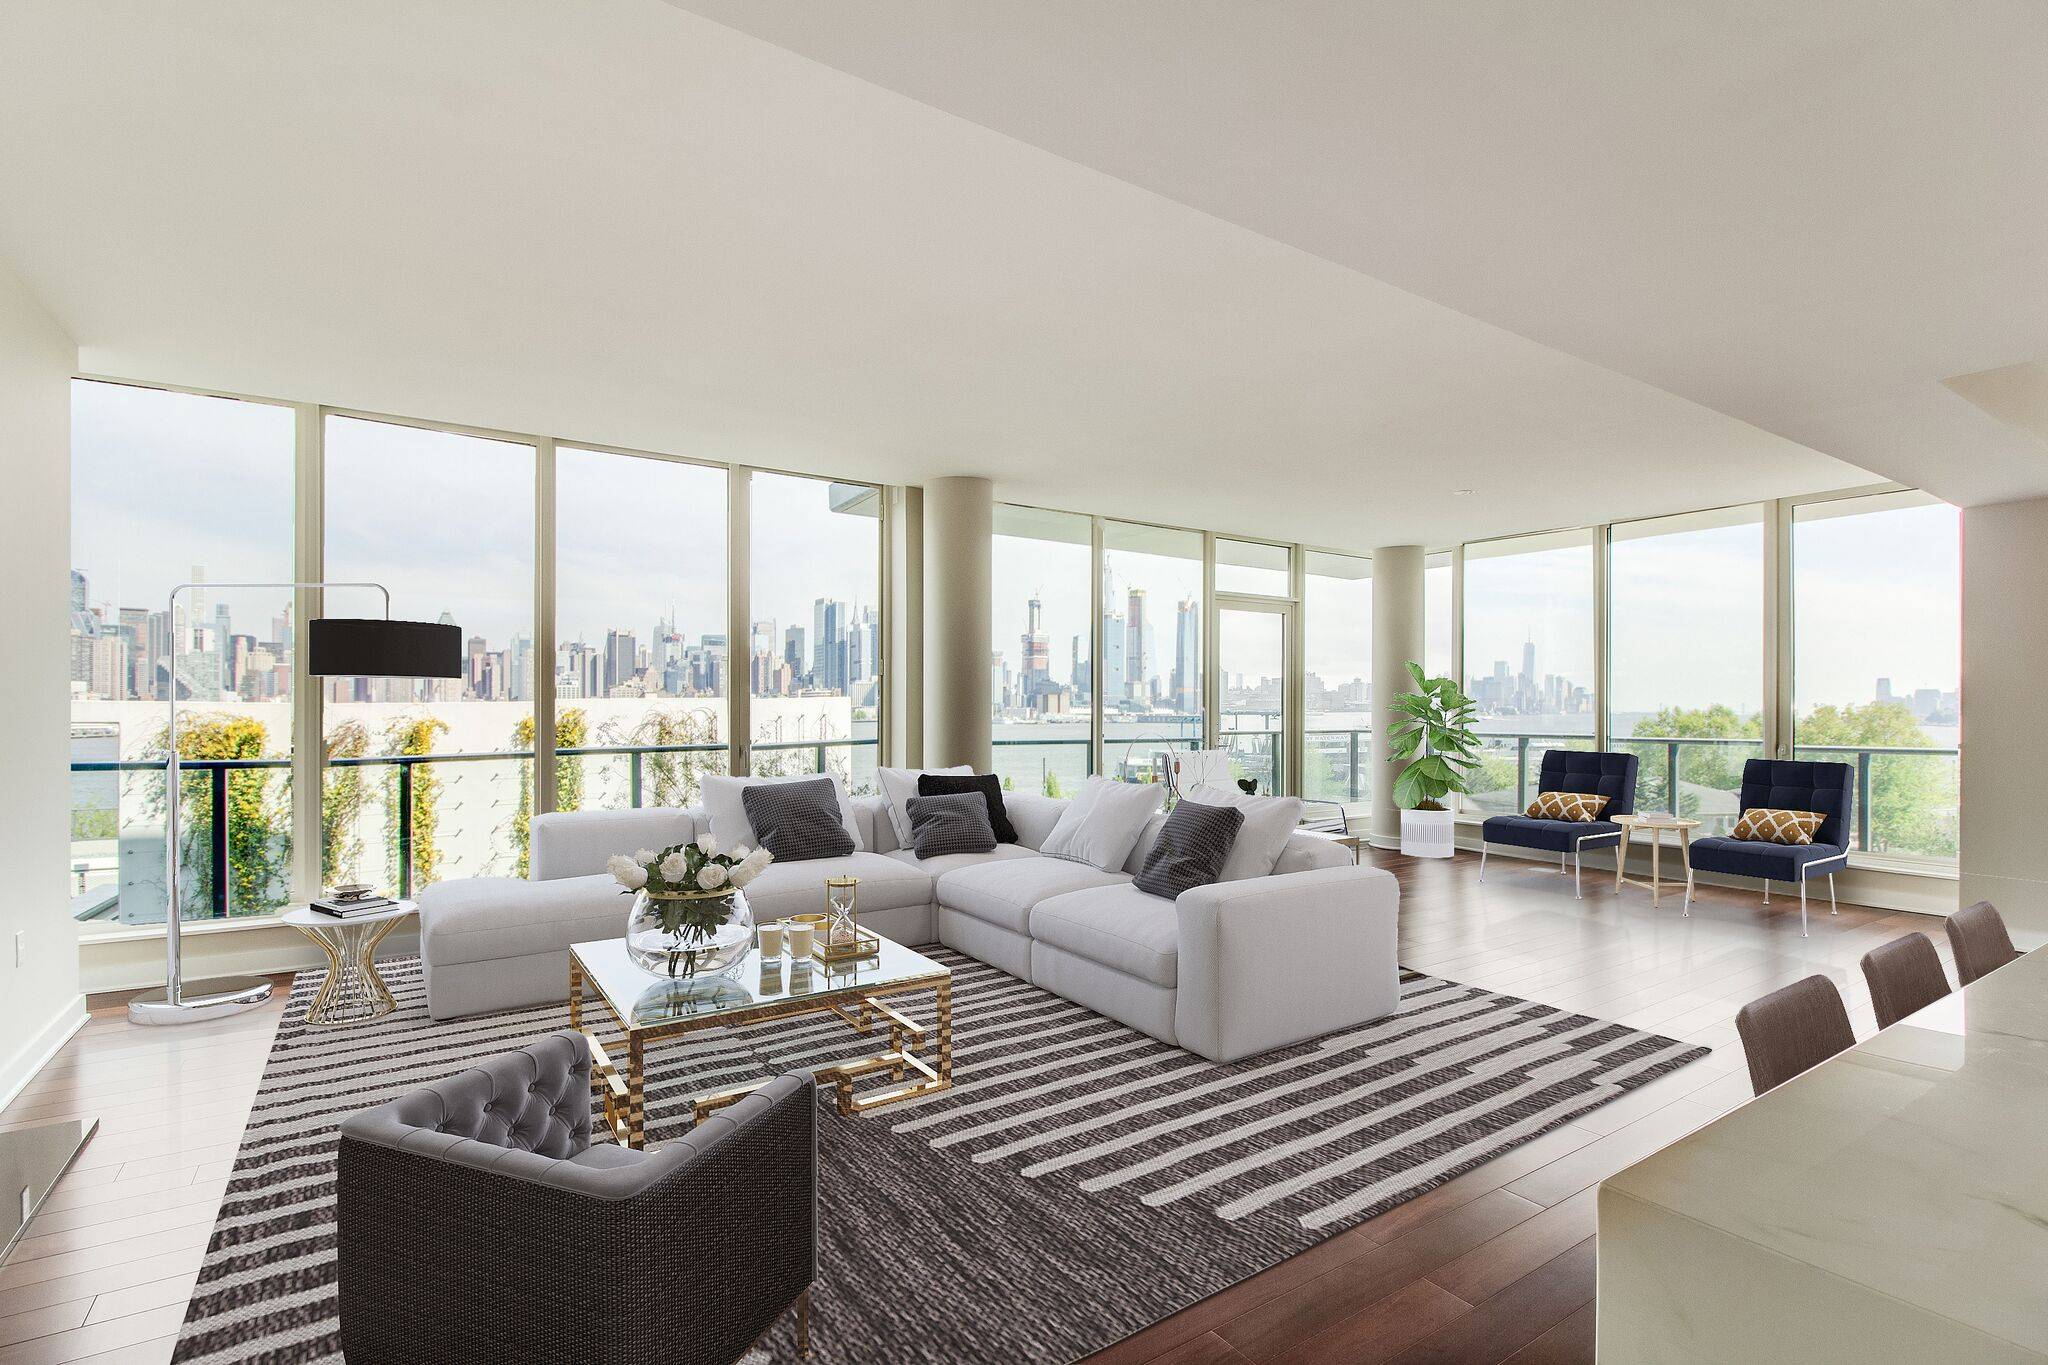 Spacious Luxury Waterfront 3 Bedroom Condo with NYC Views